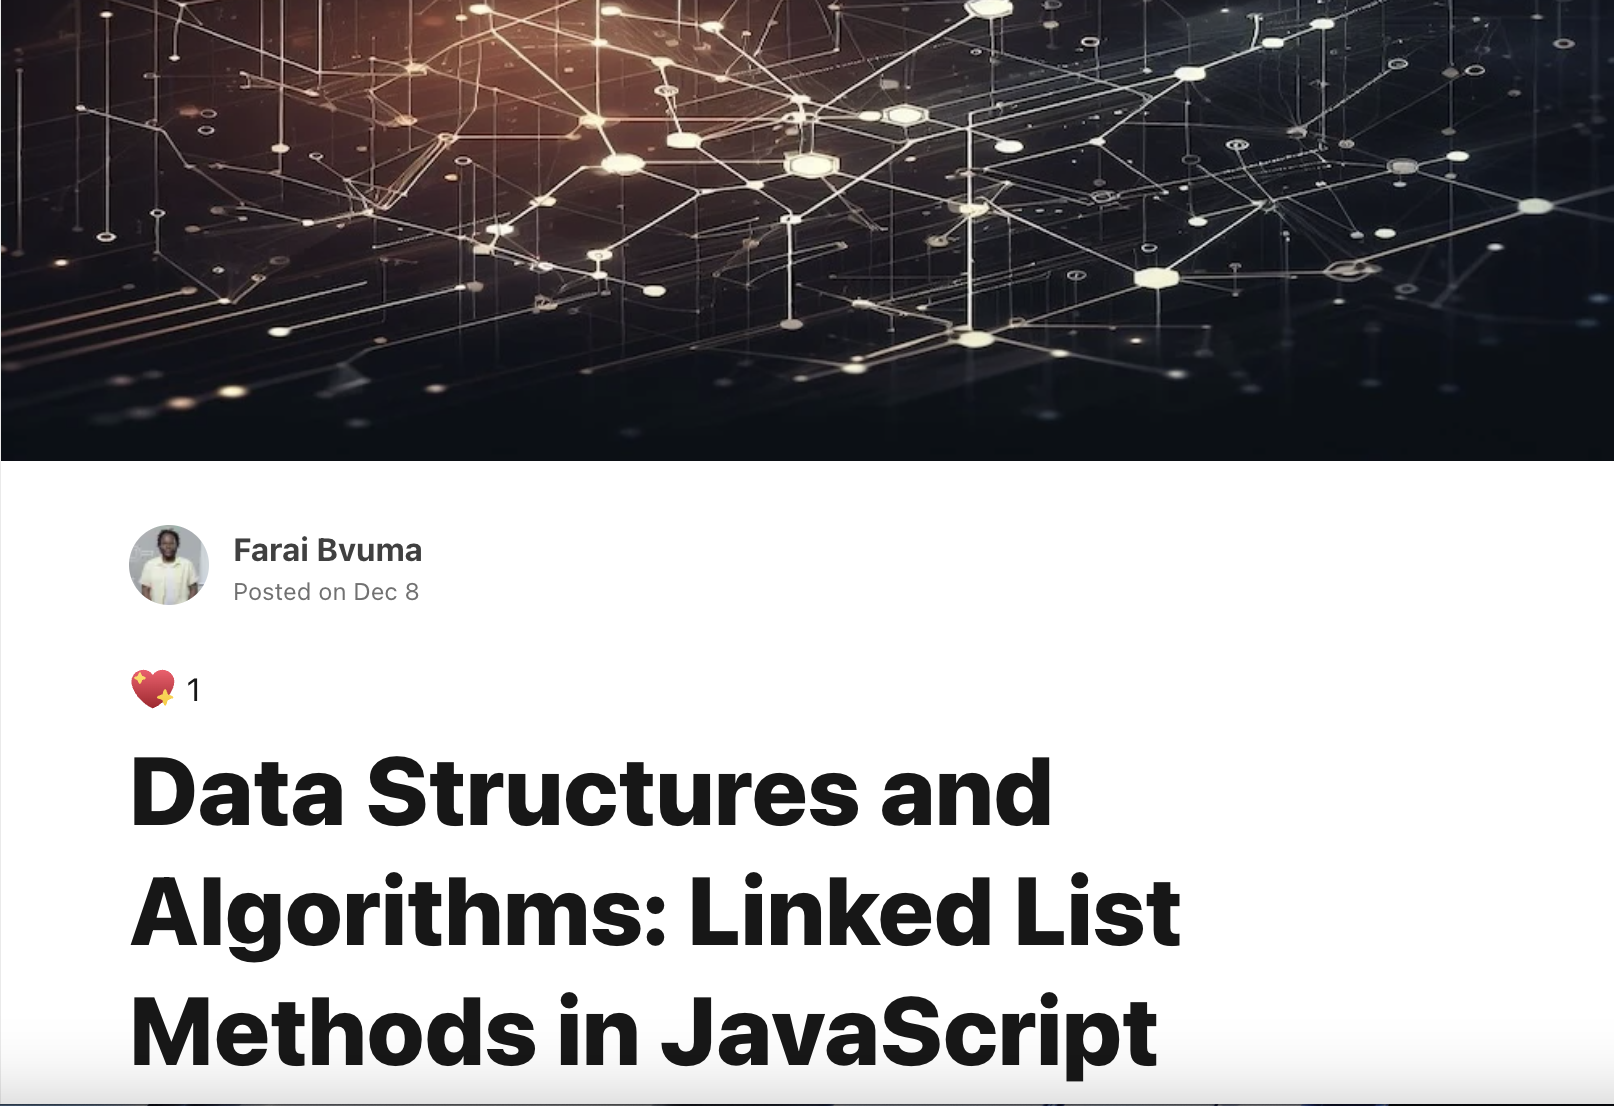 Data Structures and Algorithms: Linked List Methods in JavaScript